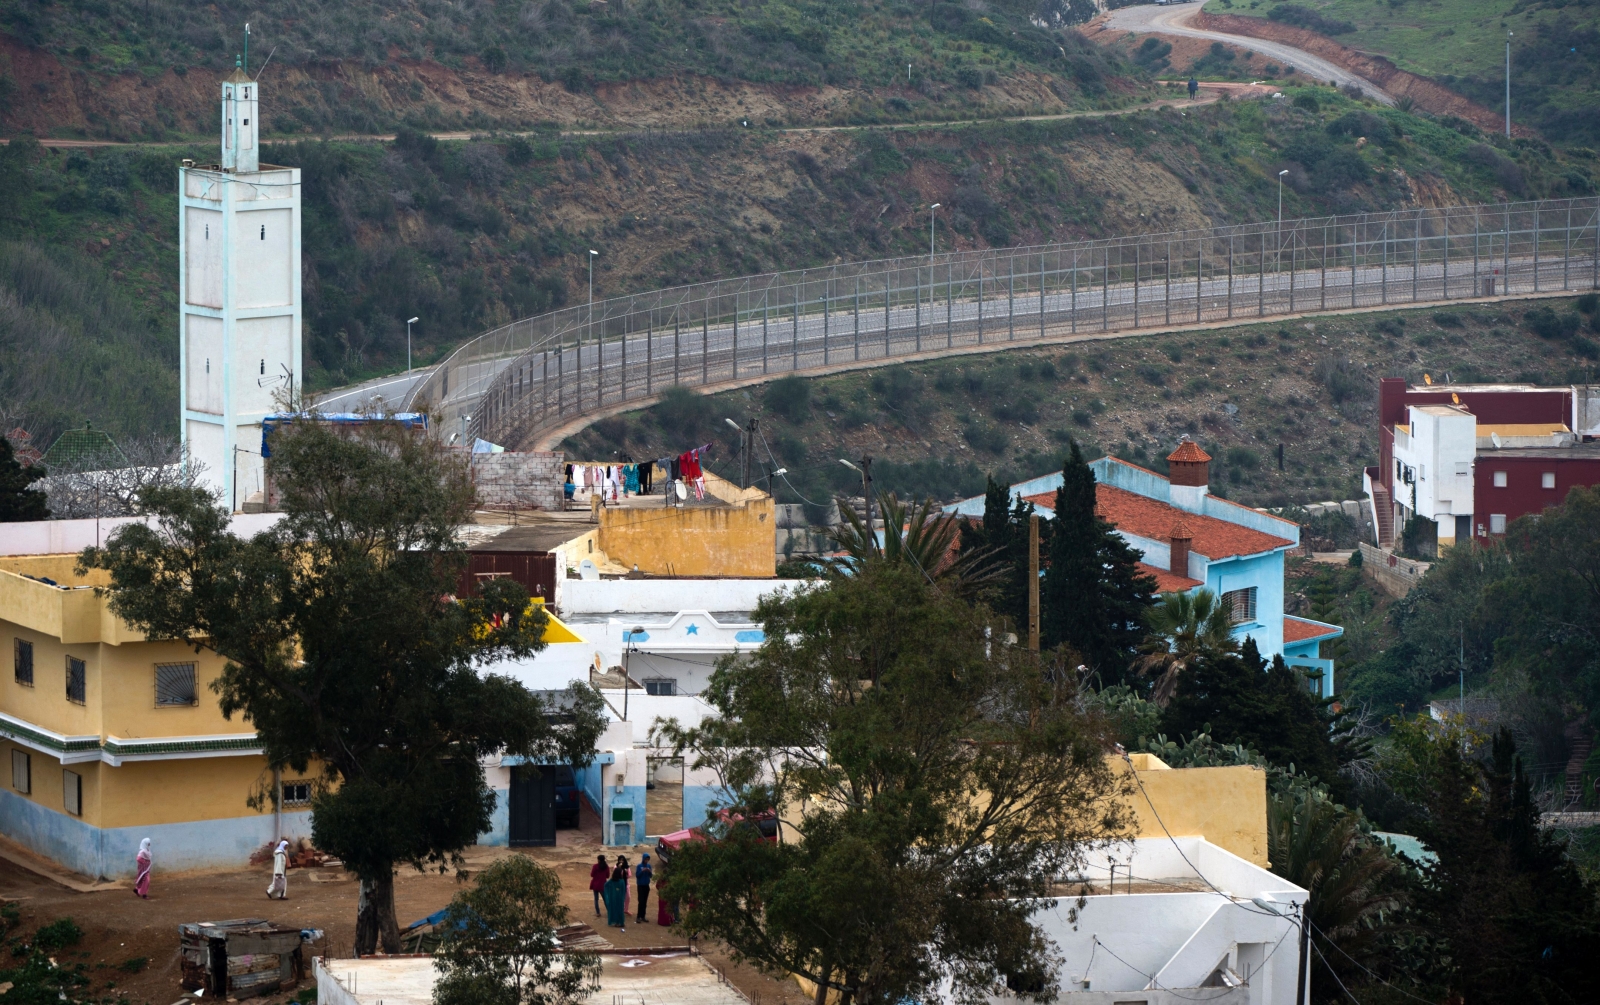 Female porter crushed to death at Ceuta-Morocco border crossing - International Business Times UK